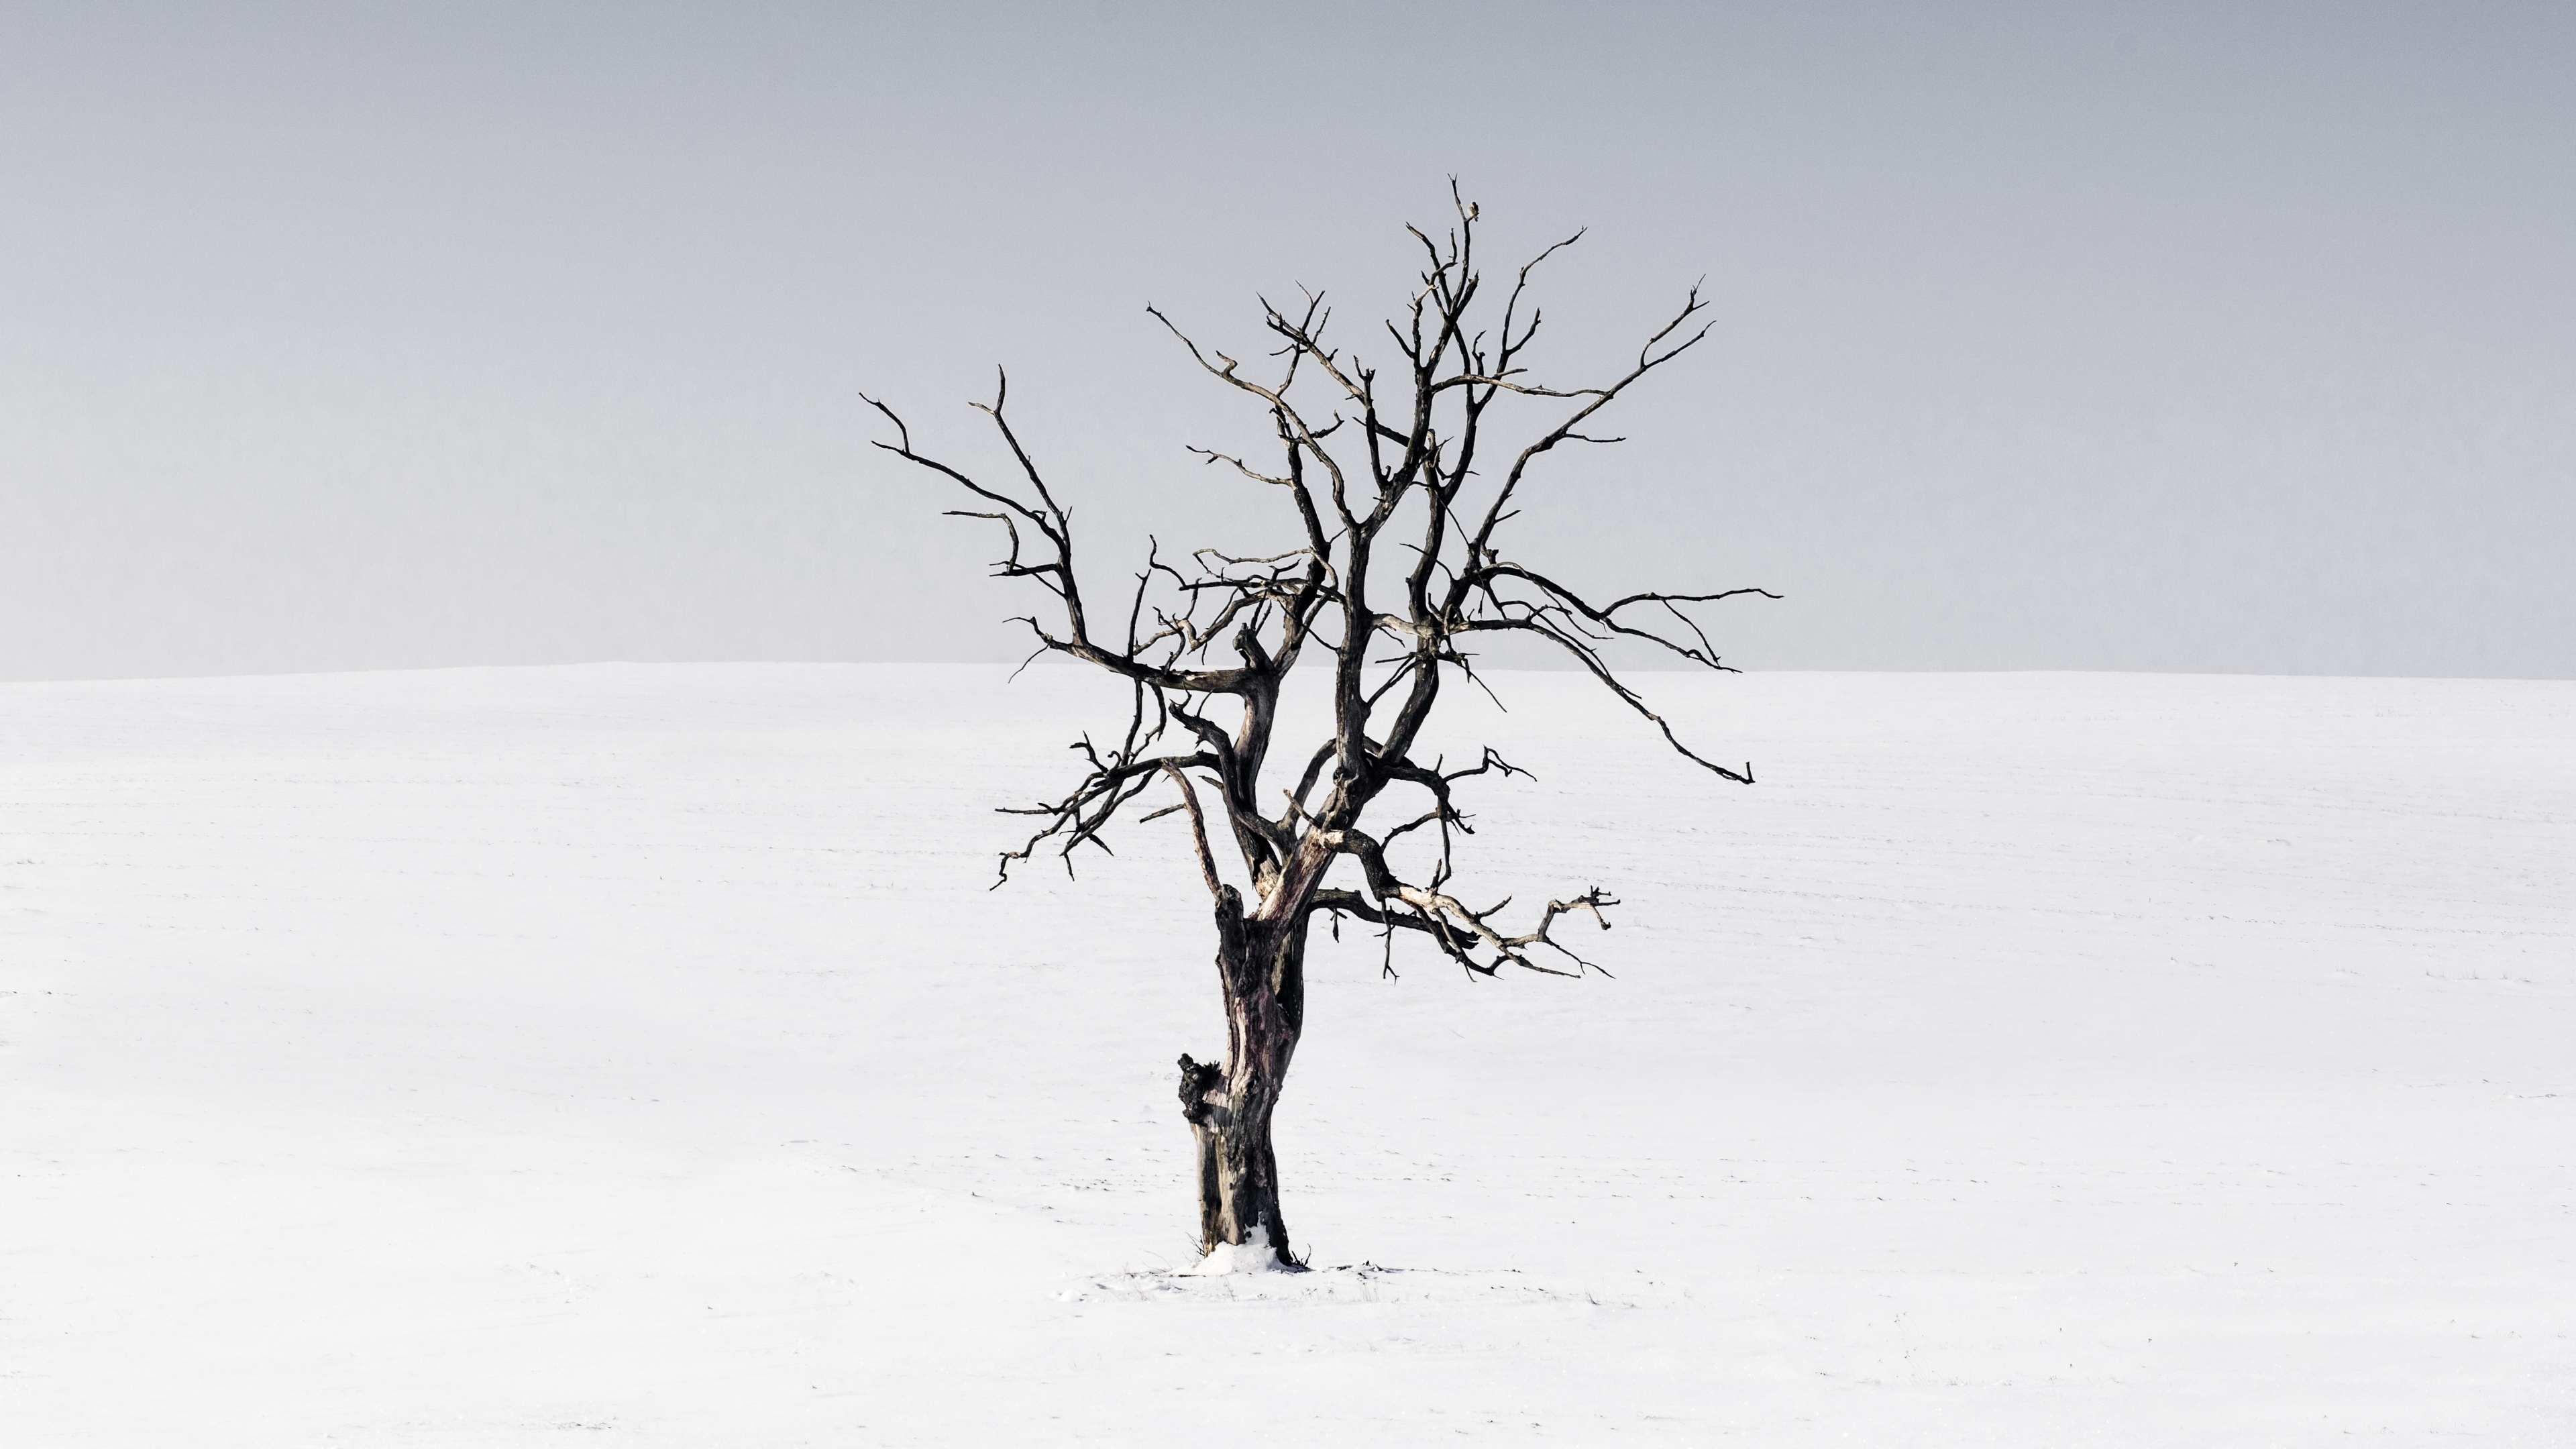 General 3840x2160 nature landscape winter snow trees clear sky horizon branch minimalism white